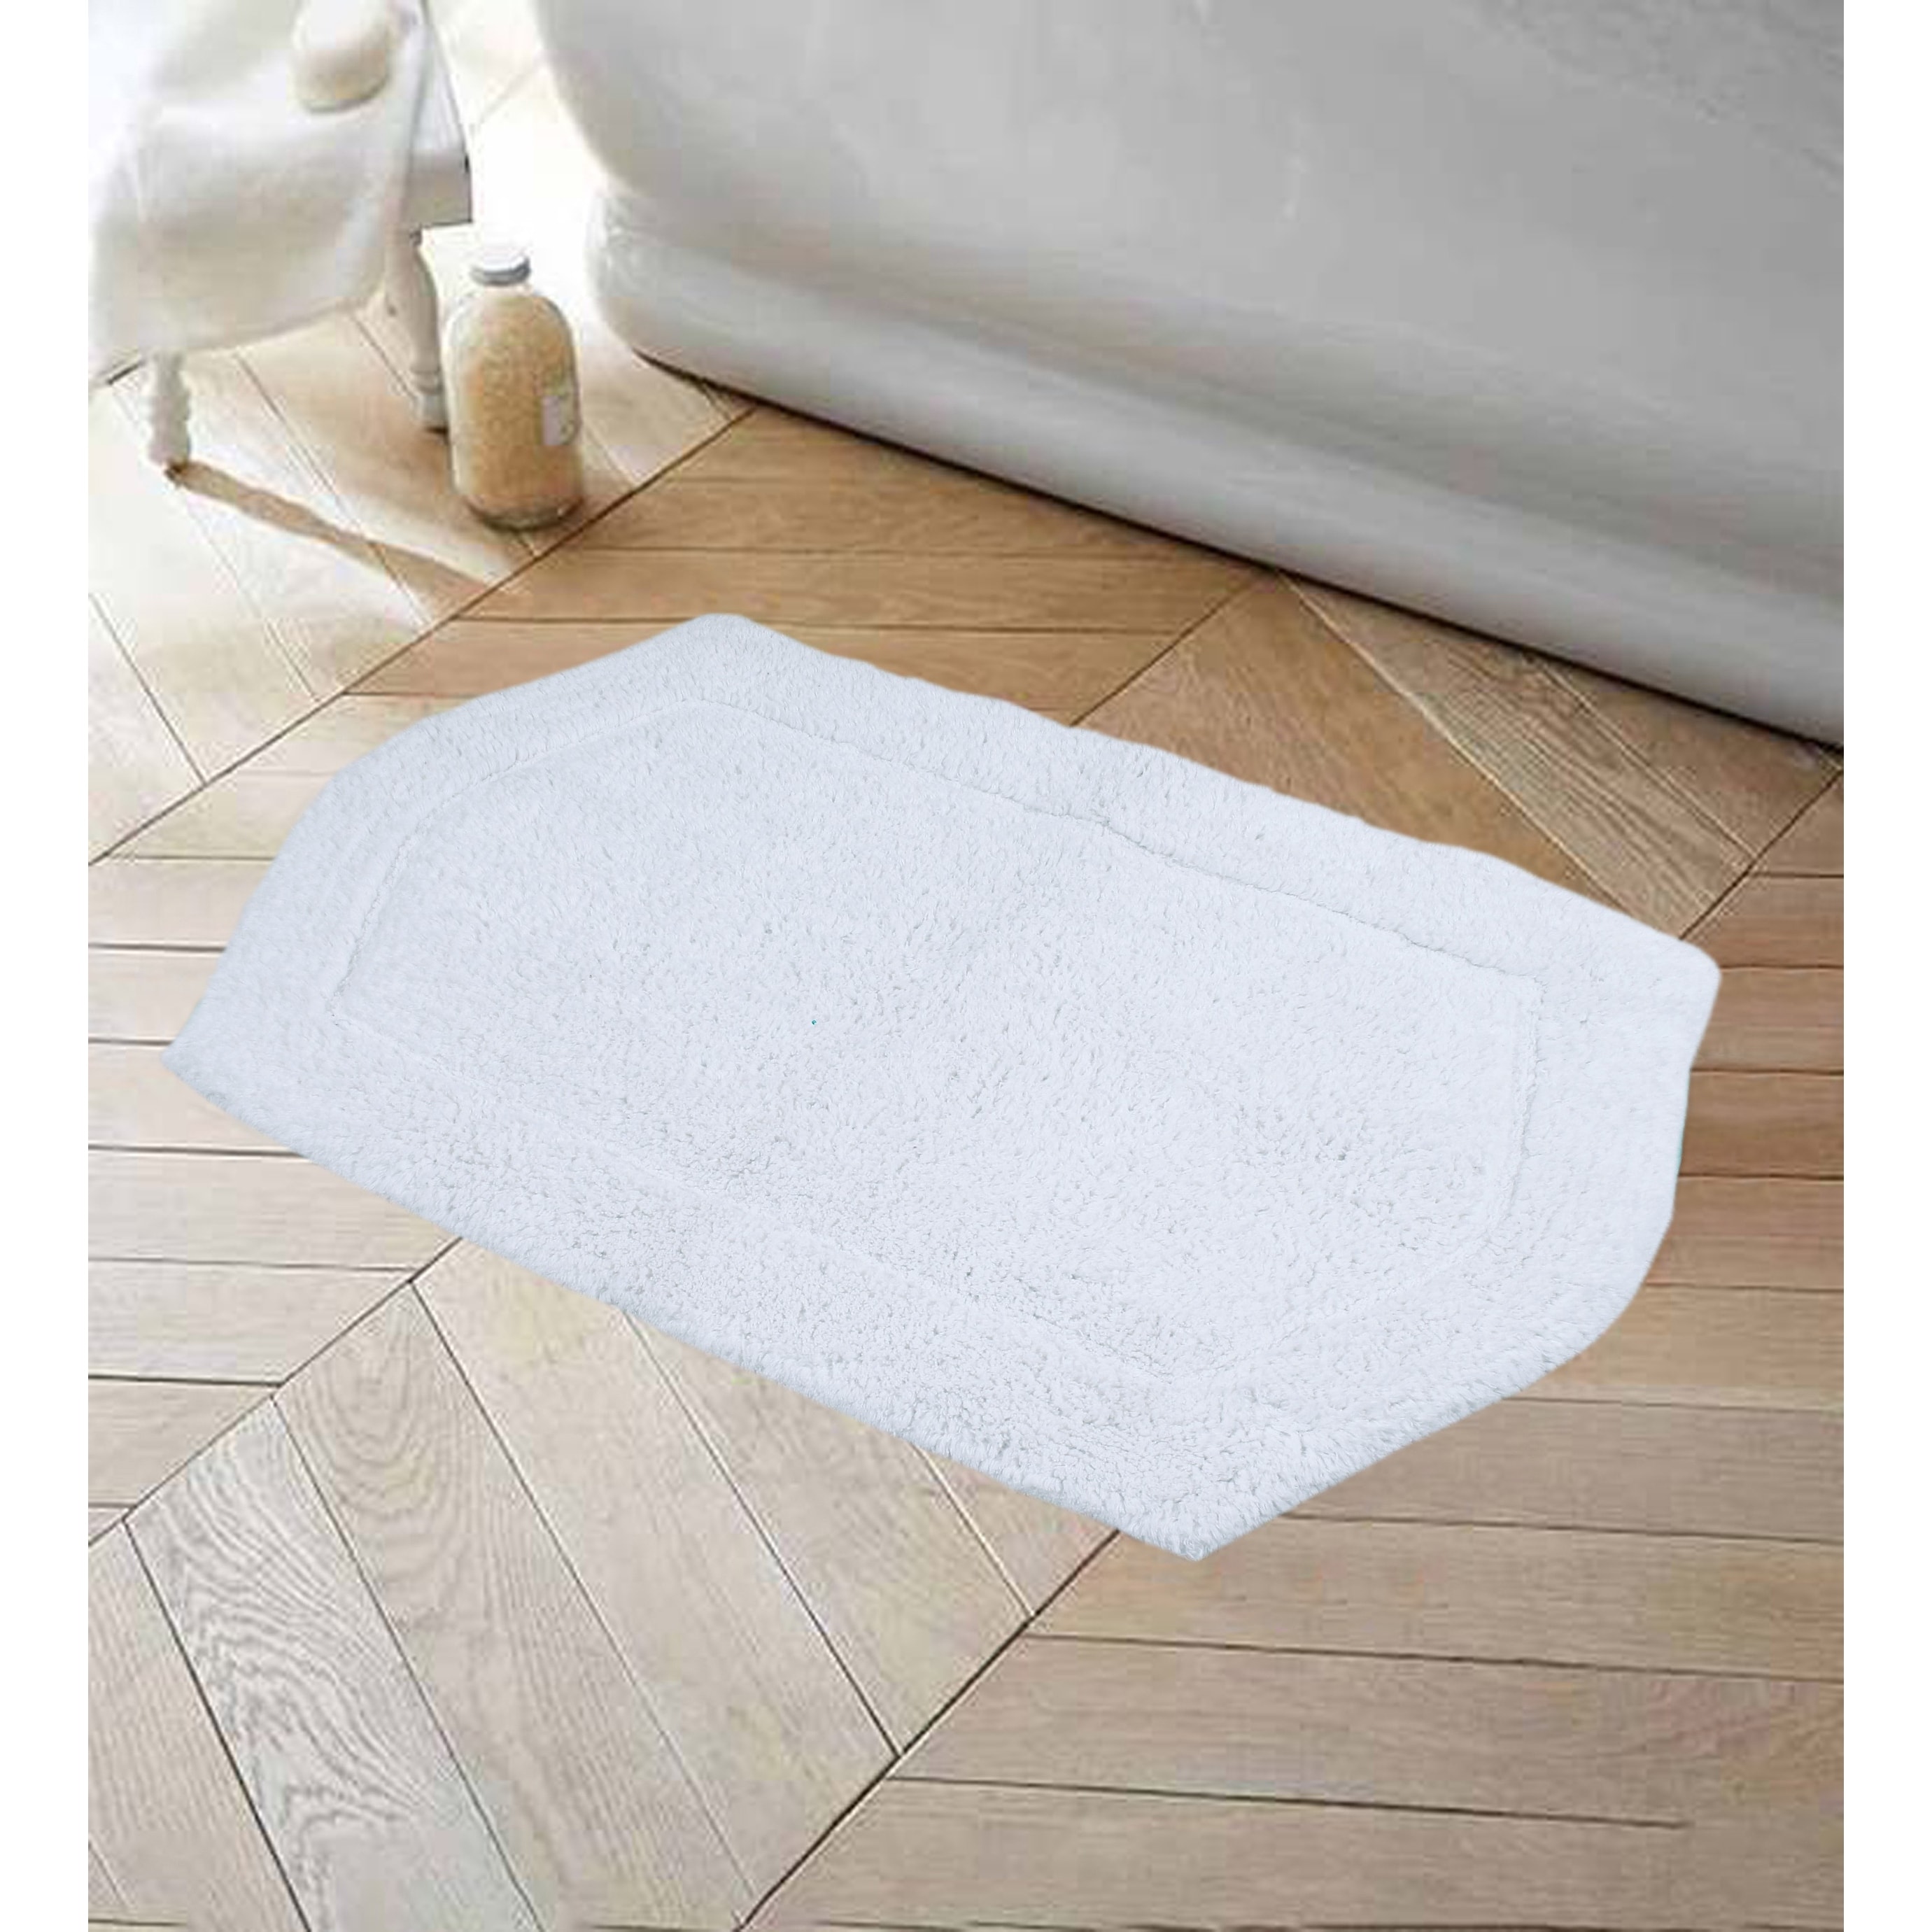 https://ak1.ostkcdn.com/images/products/is/images/direct/a9aa2167f06ecfc32873883be235041813e91ca7/Home-Weavers-Waterford-Collection-Bath-Rugs-Cotton-Soft-and-Absorbent-Non-Slip-Bath-Mats-Machine-Washable-bath-rugs-21%22x34%22.jpg